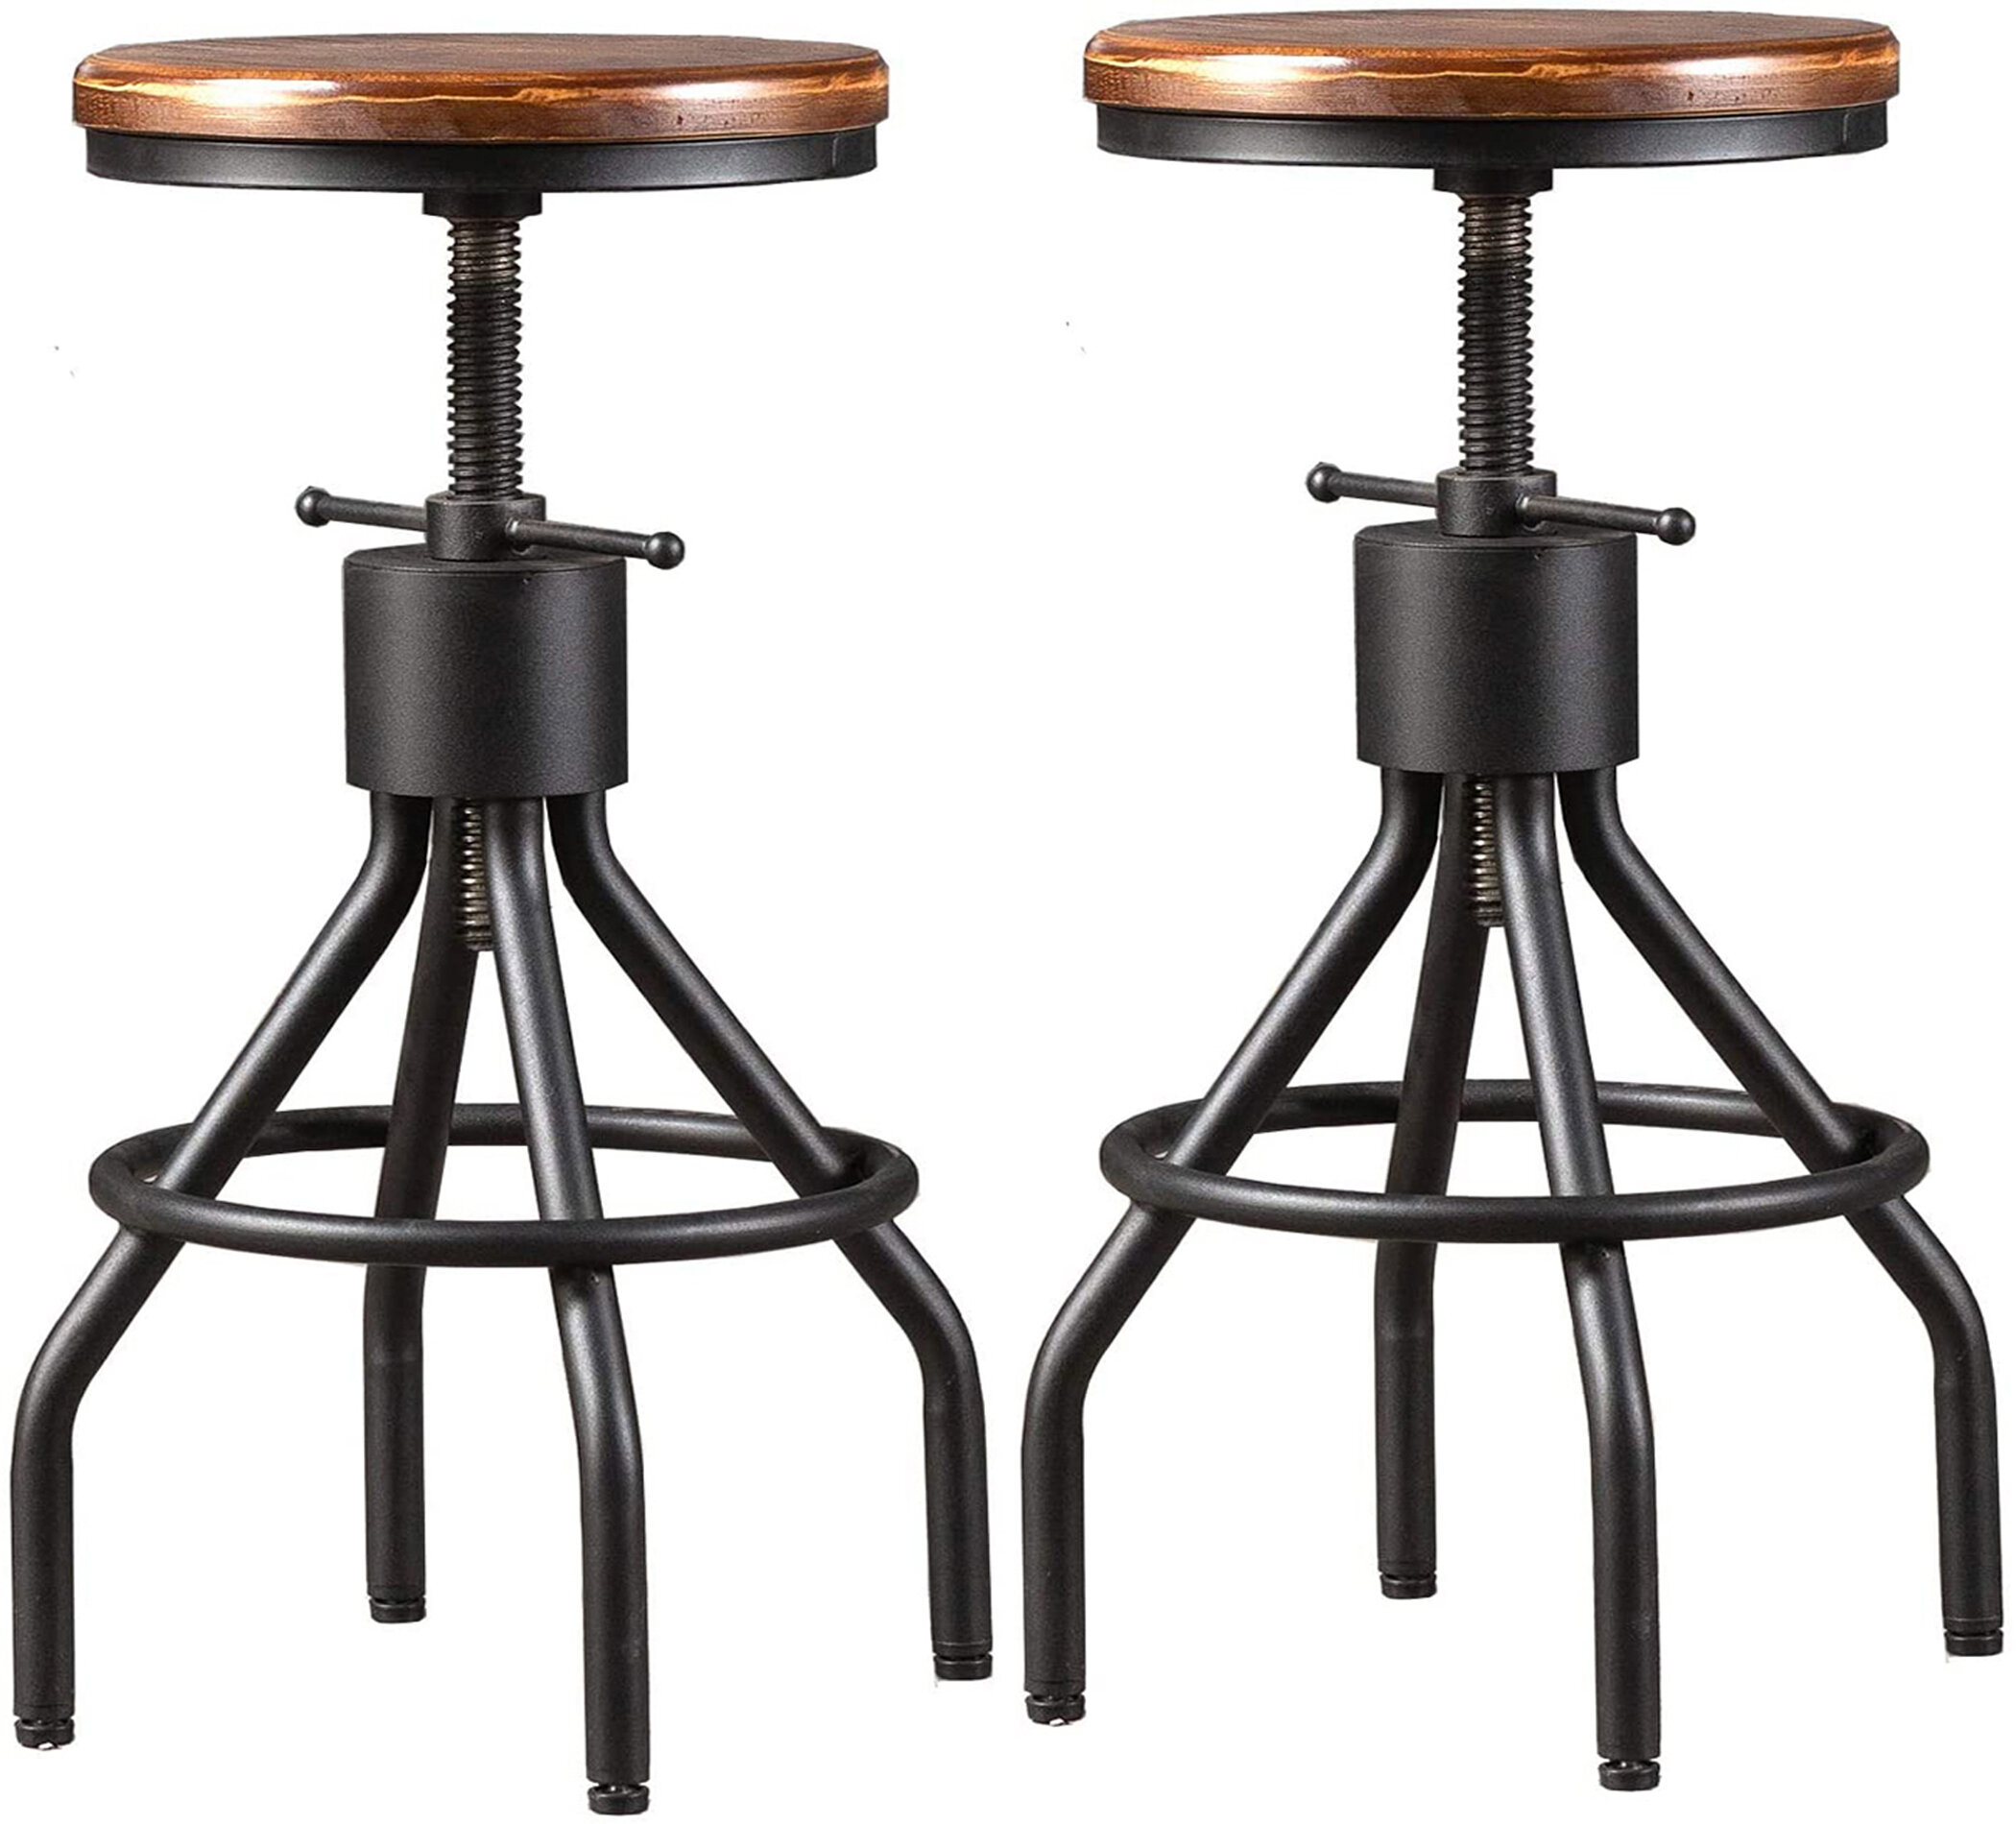 Industrial Retro Urban Bar Stool Chair Leather Top Vintage Cafe Counter Seat